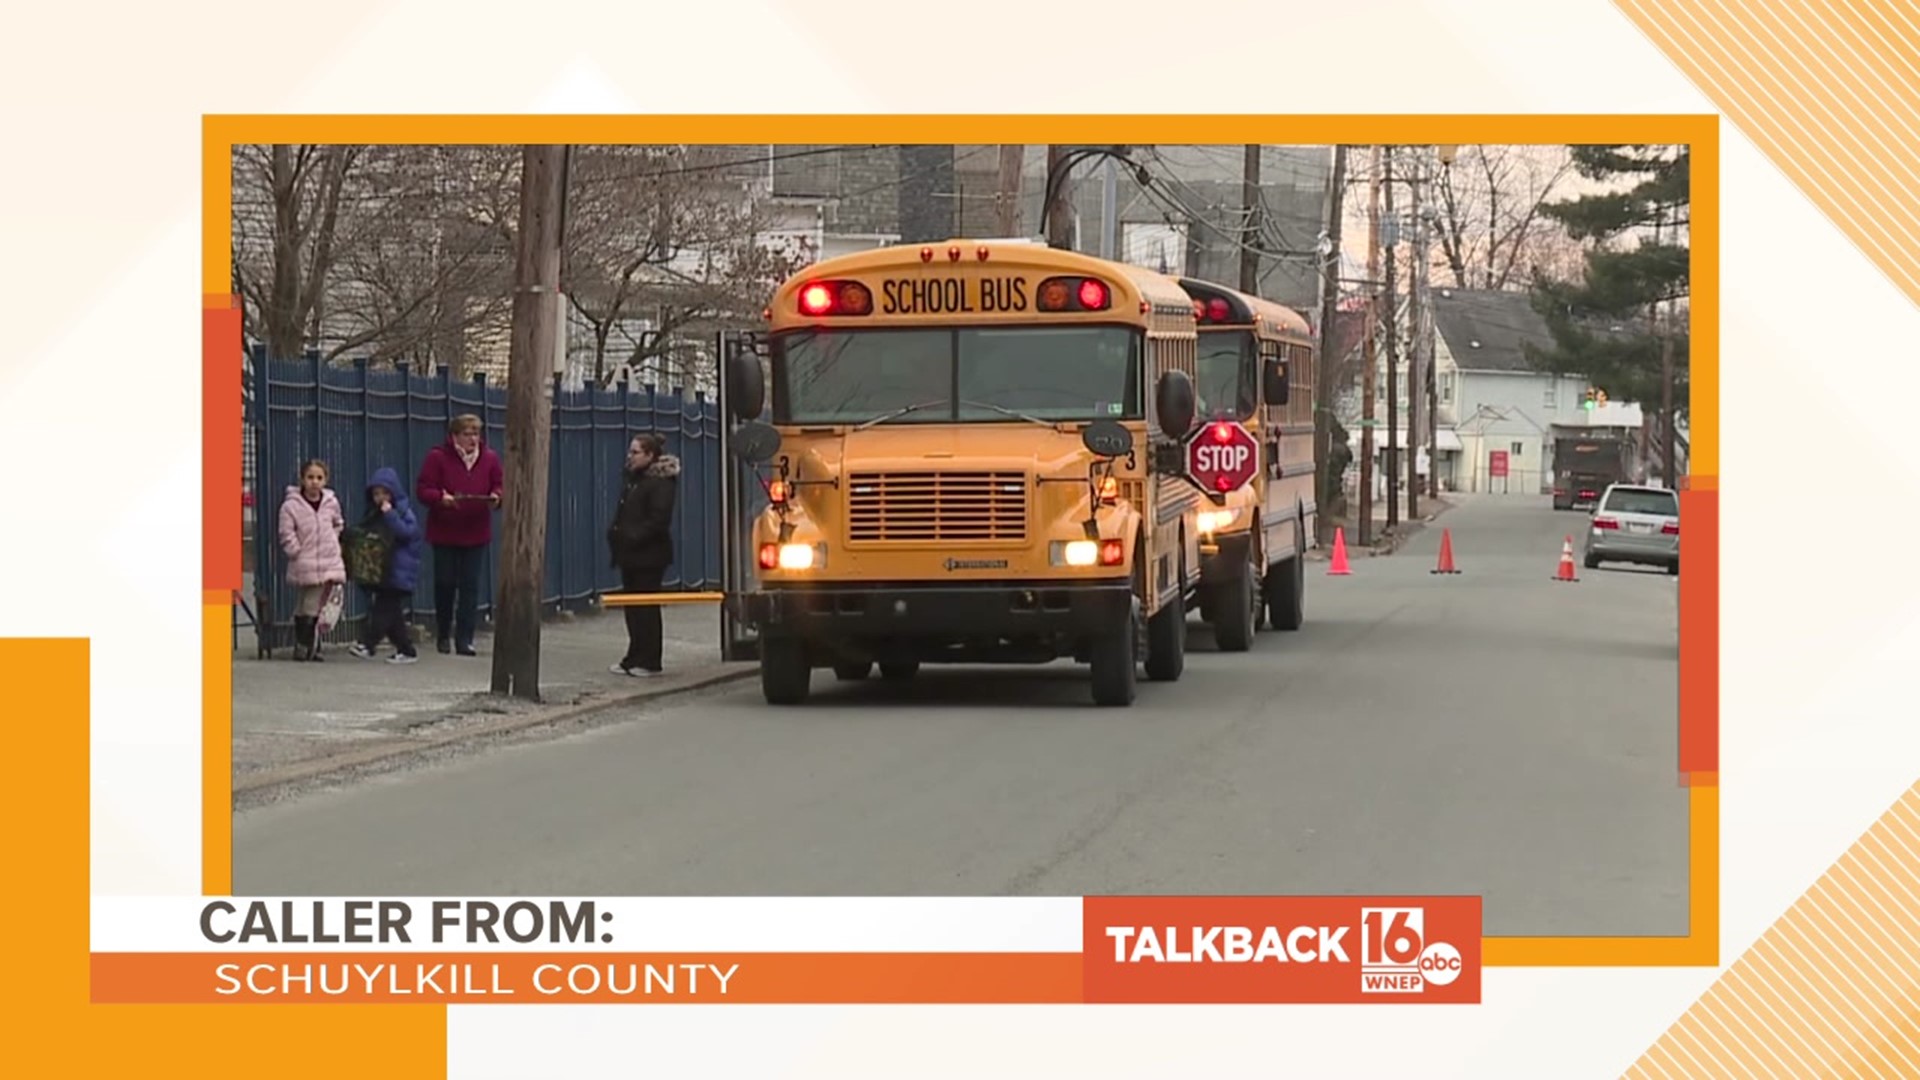 A caller from Schuylkill county says schools should reopen because COVID-19 is a hoax.